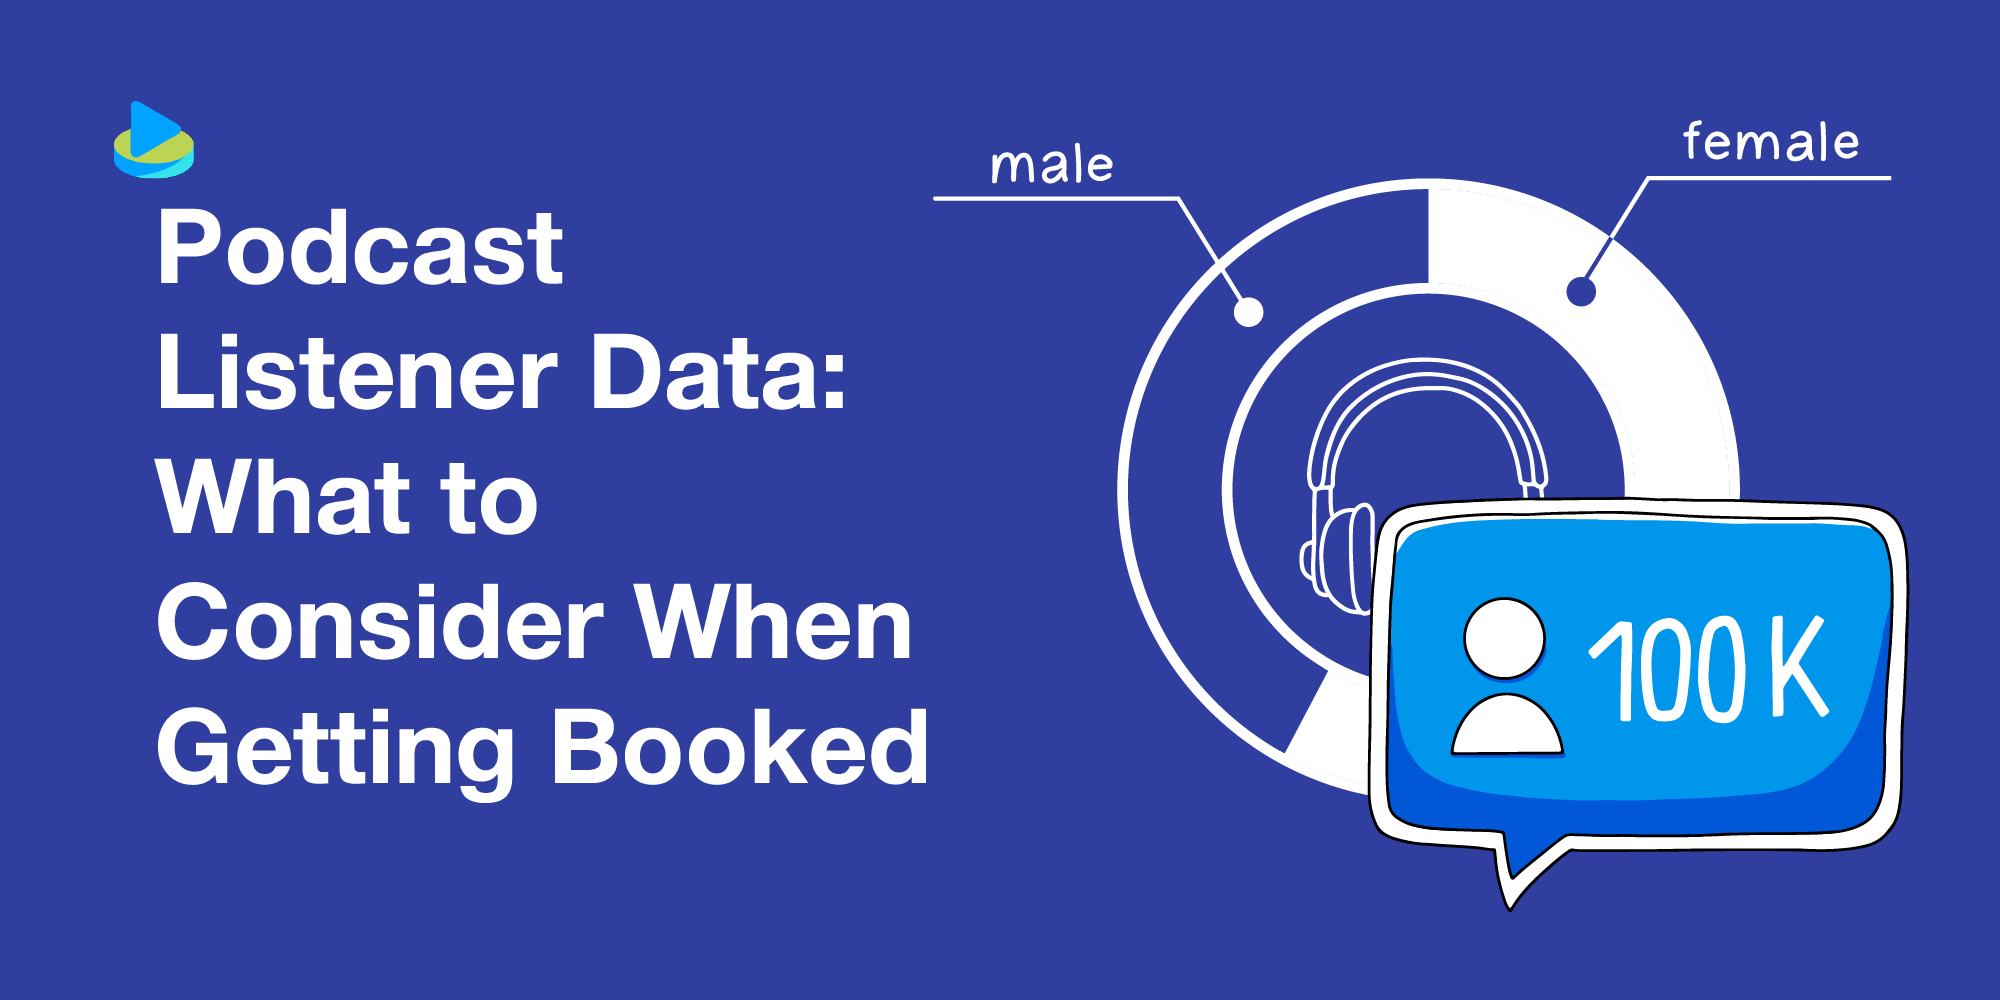 Podcast Listener Data: What to Consider When Getting Booked